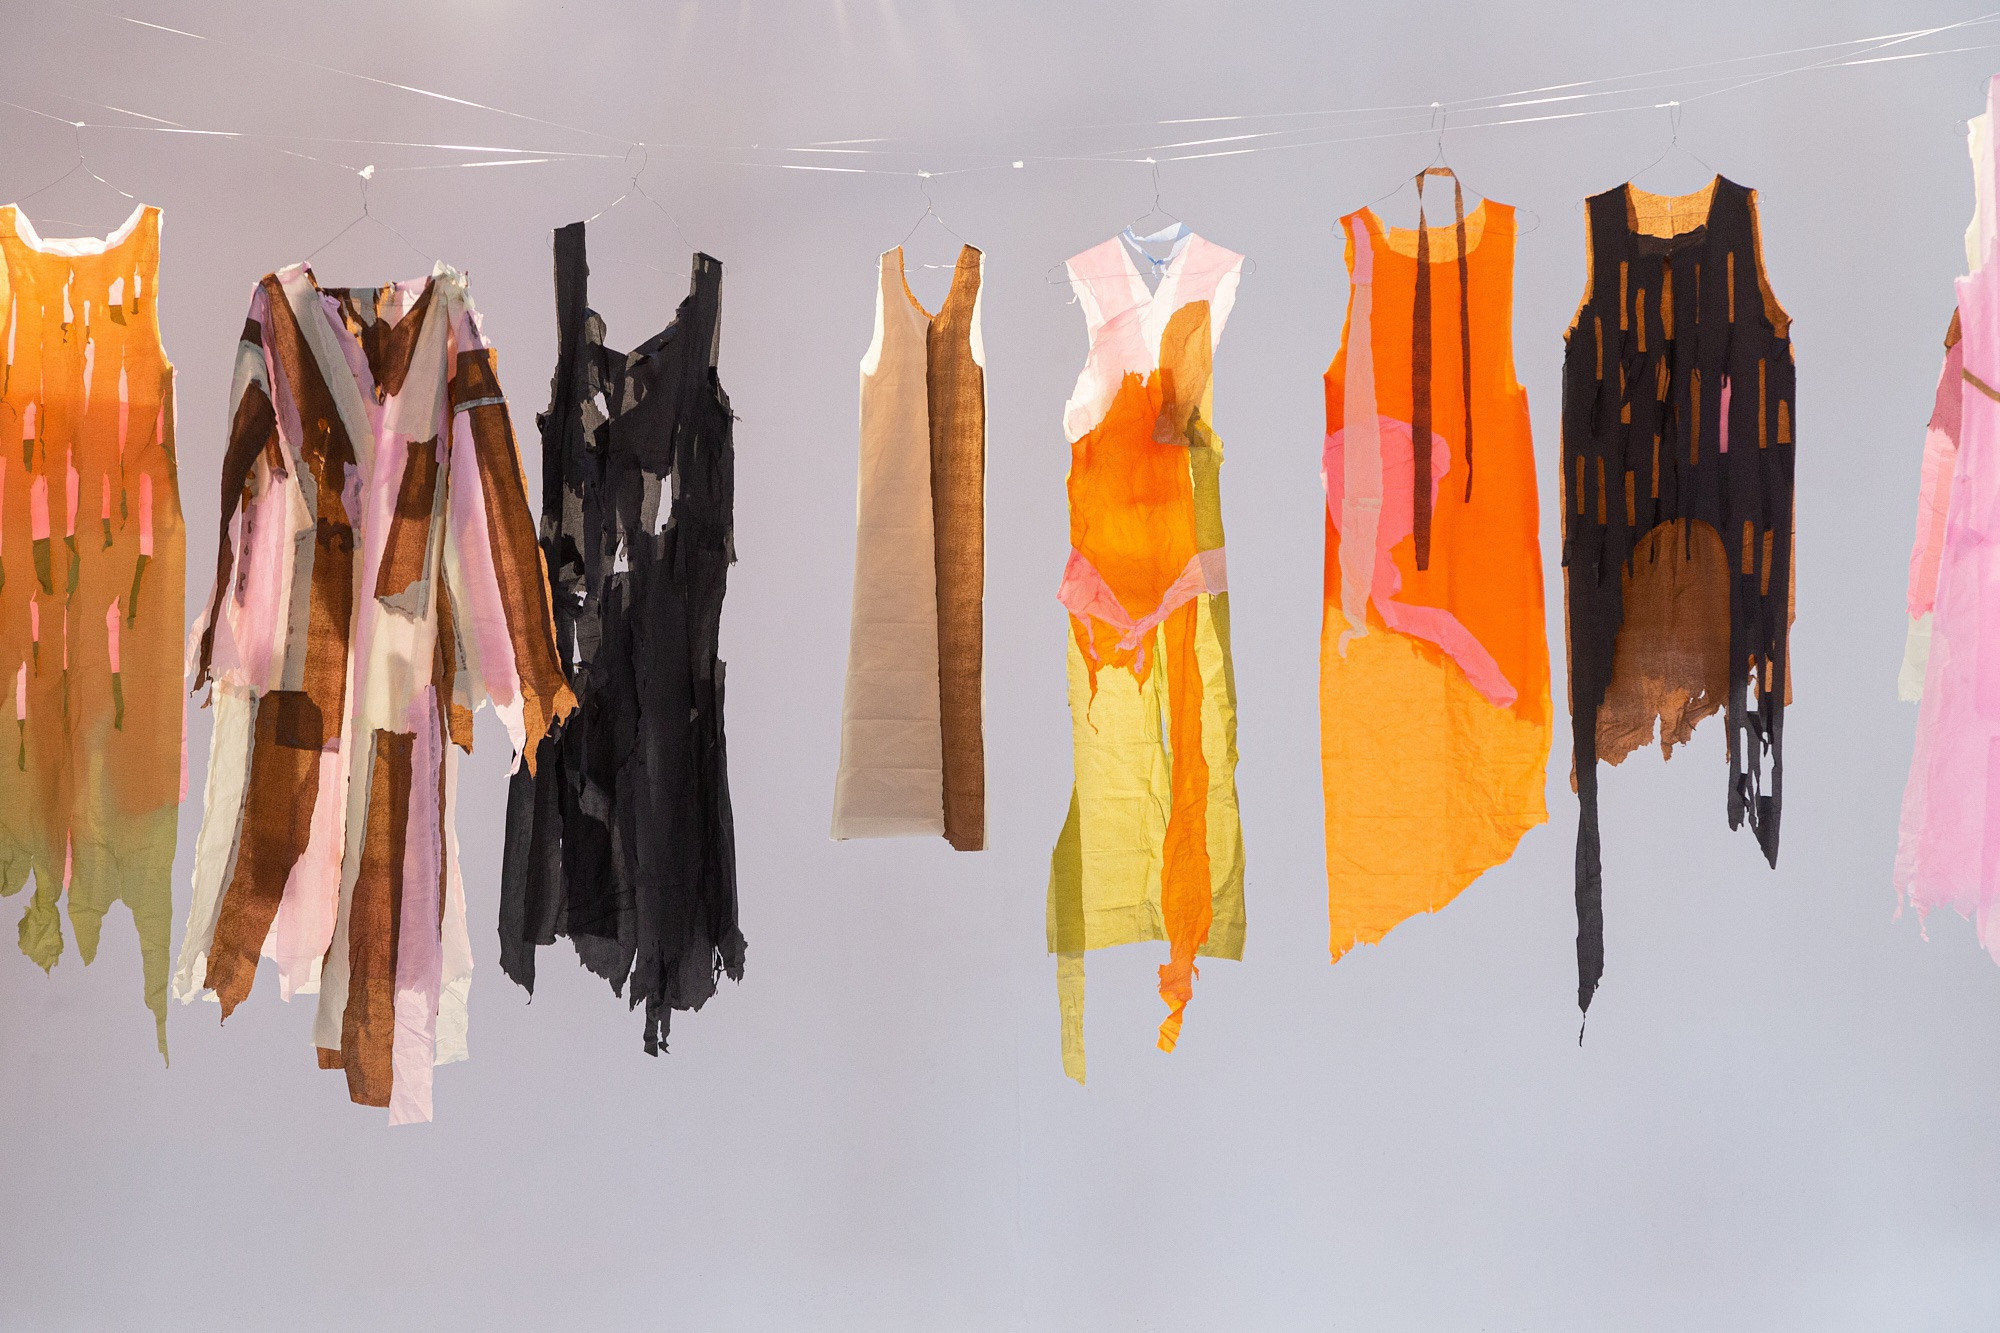 Installation View, Crepe Paper dresses, I still feel at home in my house, Albert Riera Galceran, 2022